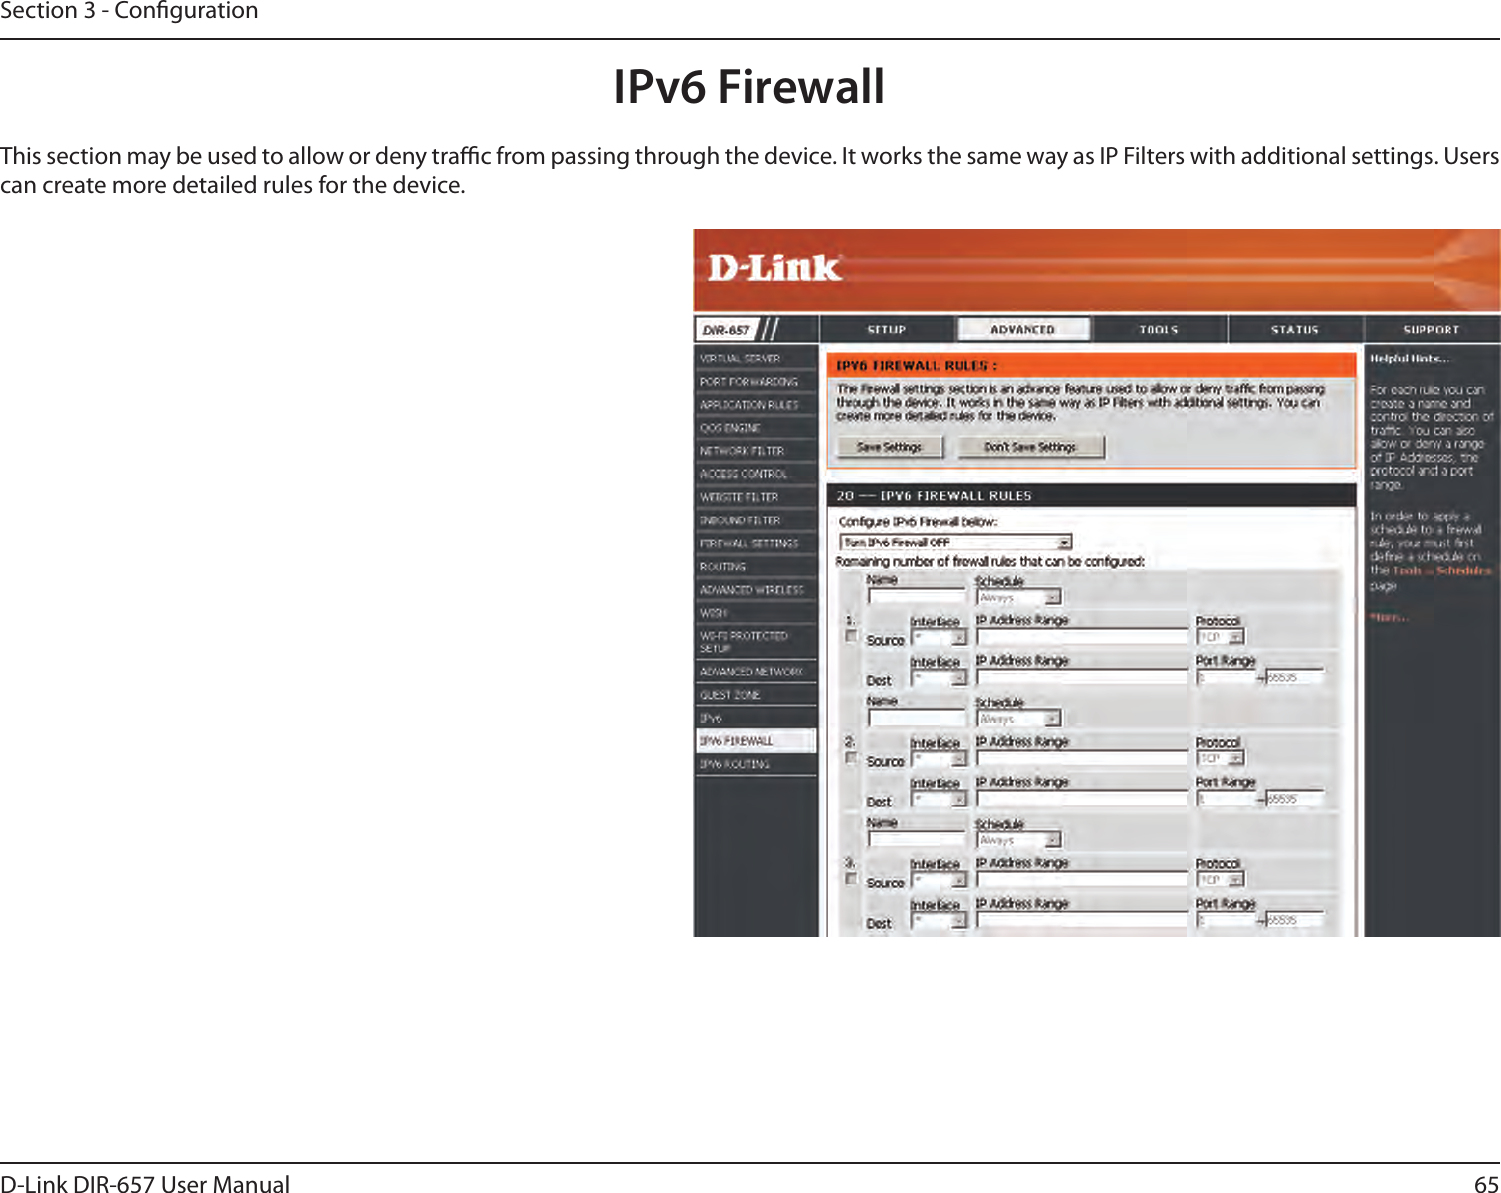 65D-Link DIR-657 User ManualSection 3 - CongurationIPv6 FirewallThis section may be used to allow or deny trac from passing through the device. It works the same way as IP Filters with additional settings. Users can create more detailed rules for the device. 